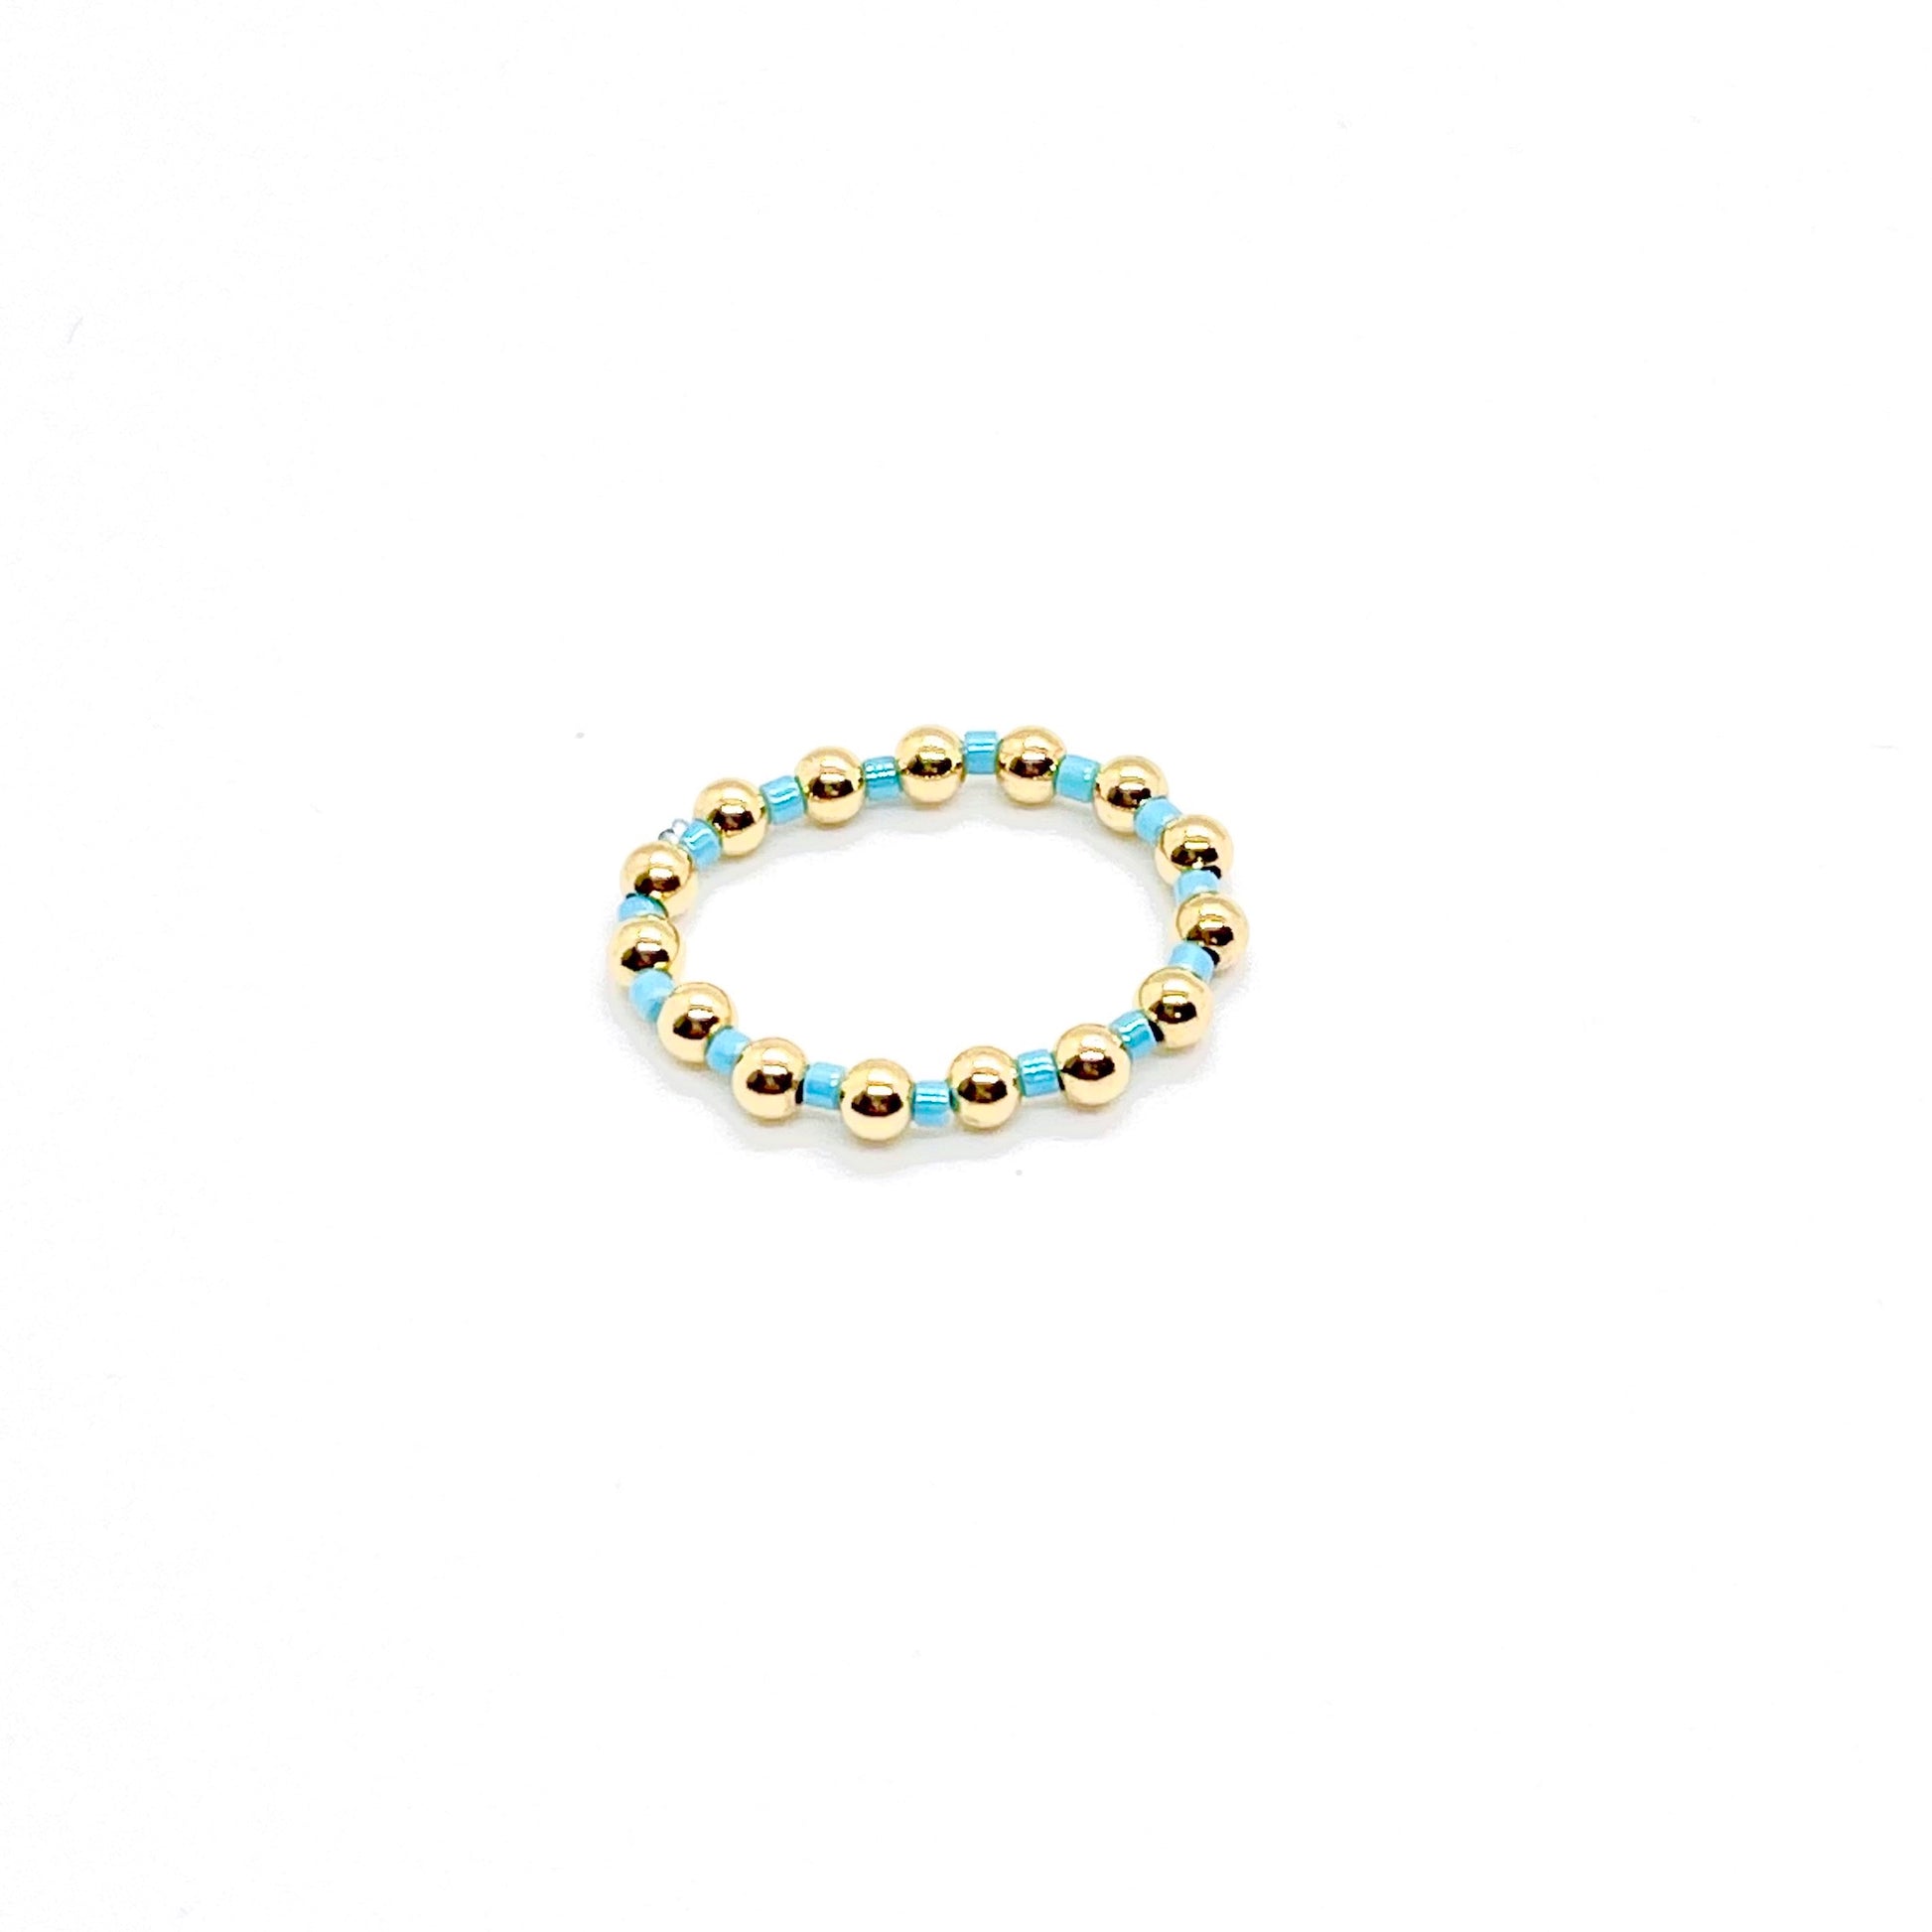 Beaded ring | 3mm gold ball ring with alternating blue seed beads on stretch cord.